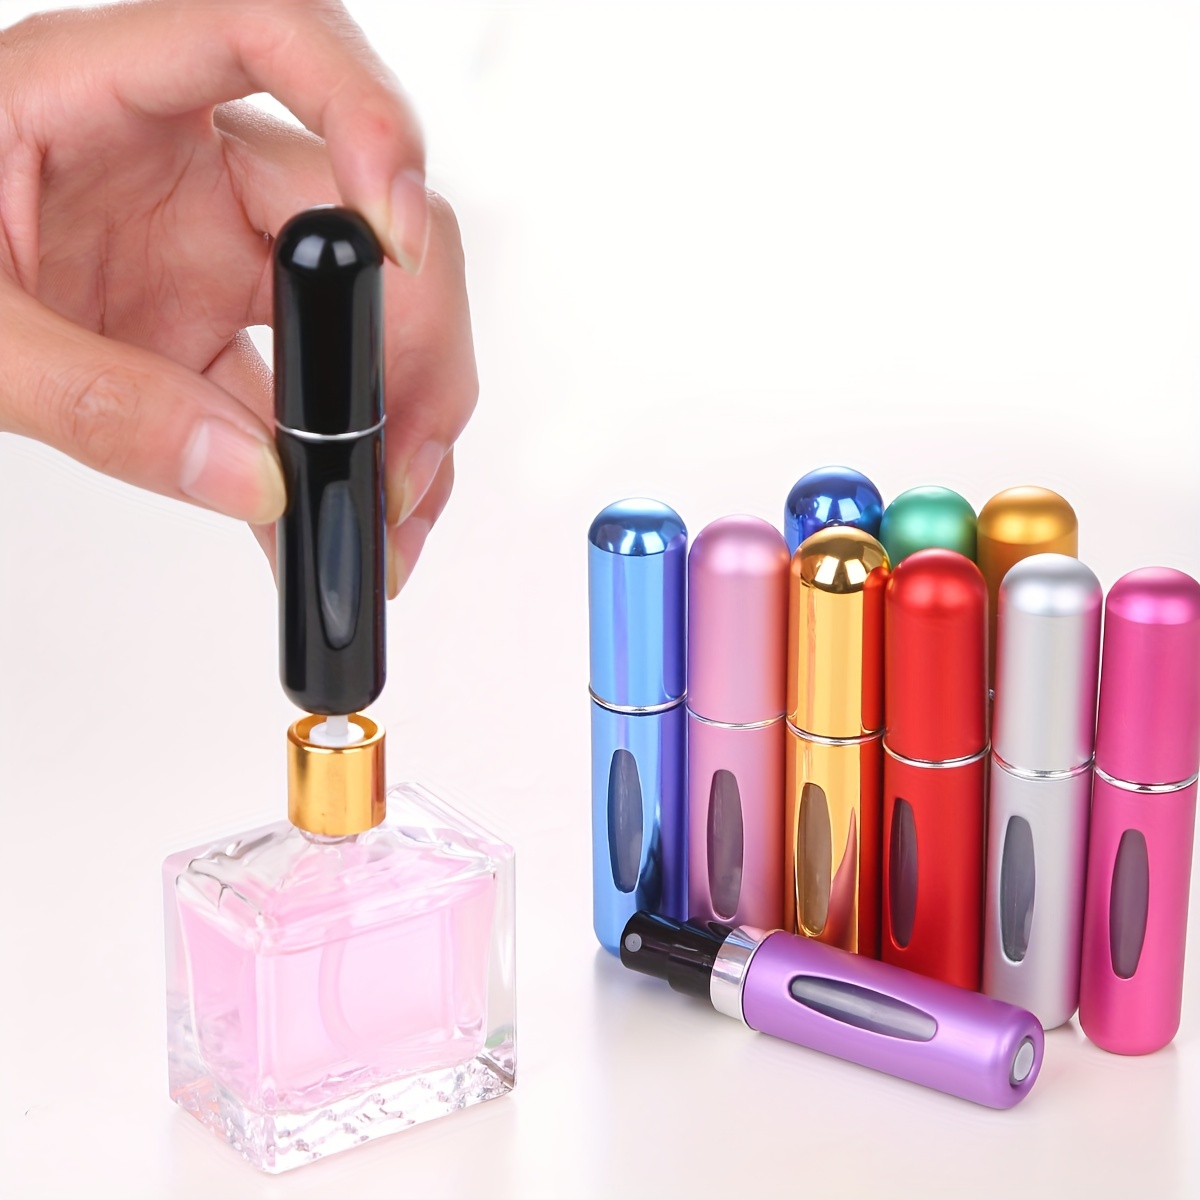 Yeejok Perfume Atomizer for Travel, Portable Mini Refillable Empty Perfume  Bottles, Leakproof Cologne Container Perfume Spray Bottle for Men Women